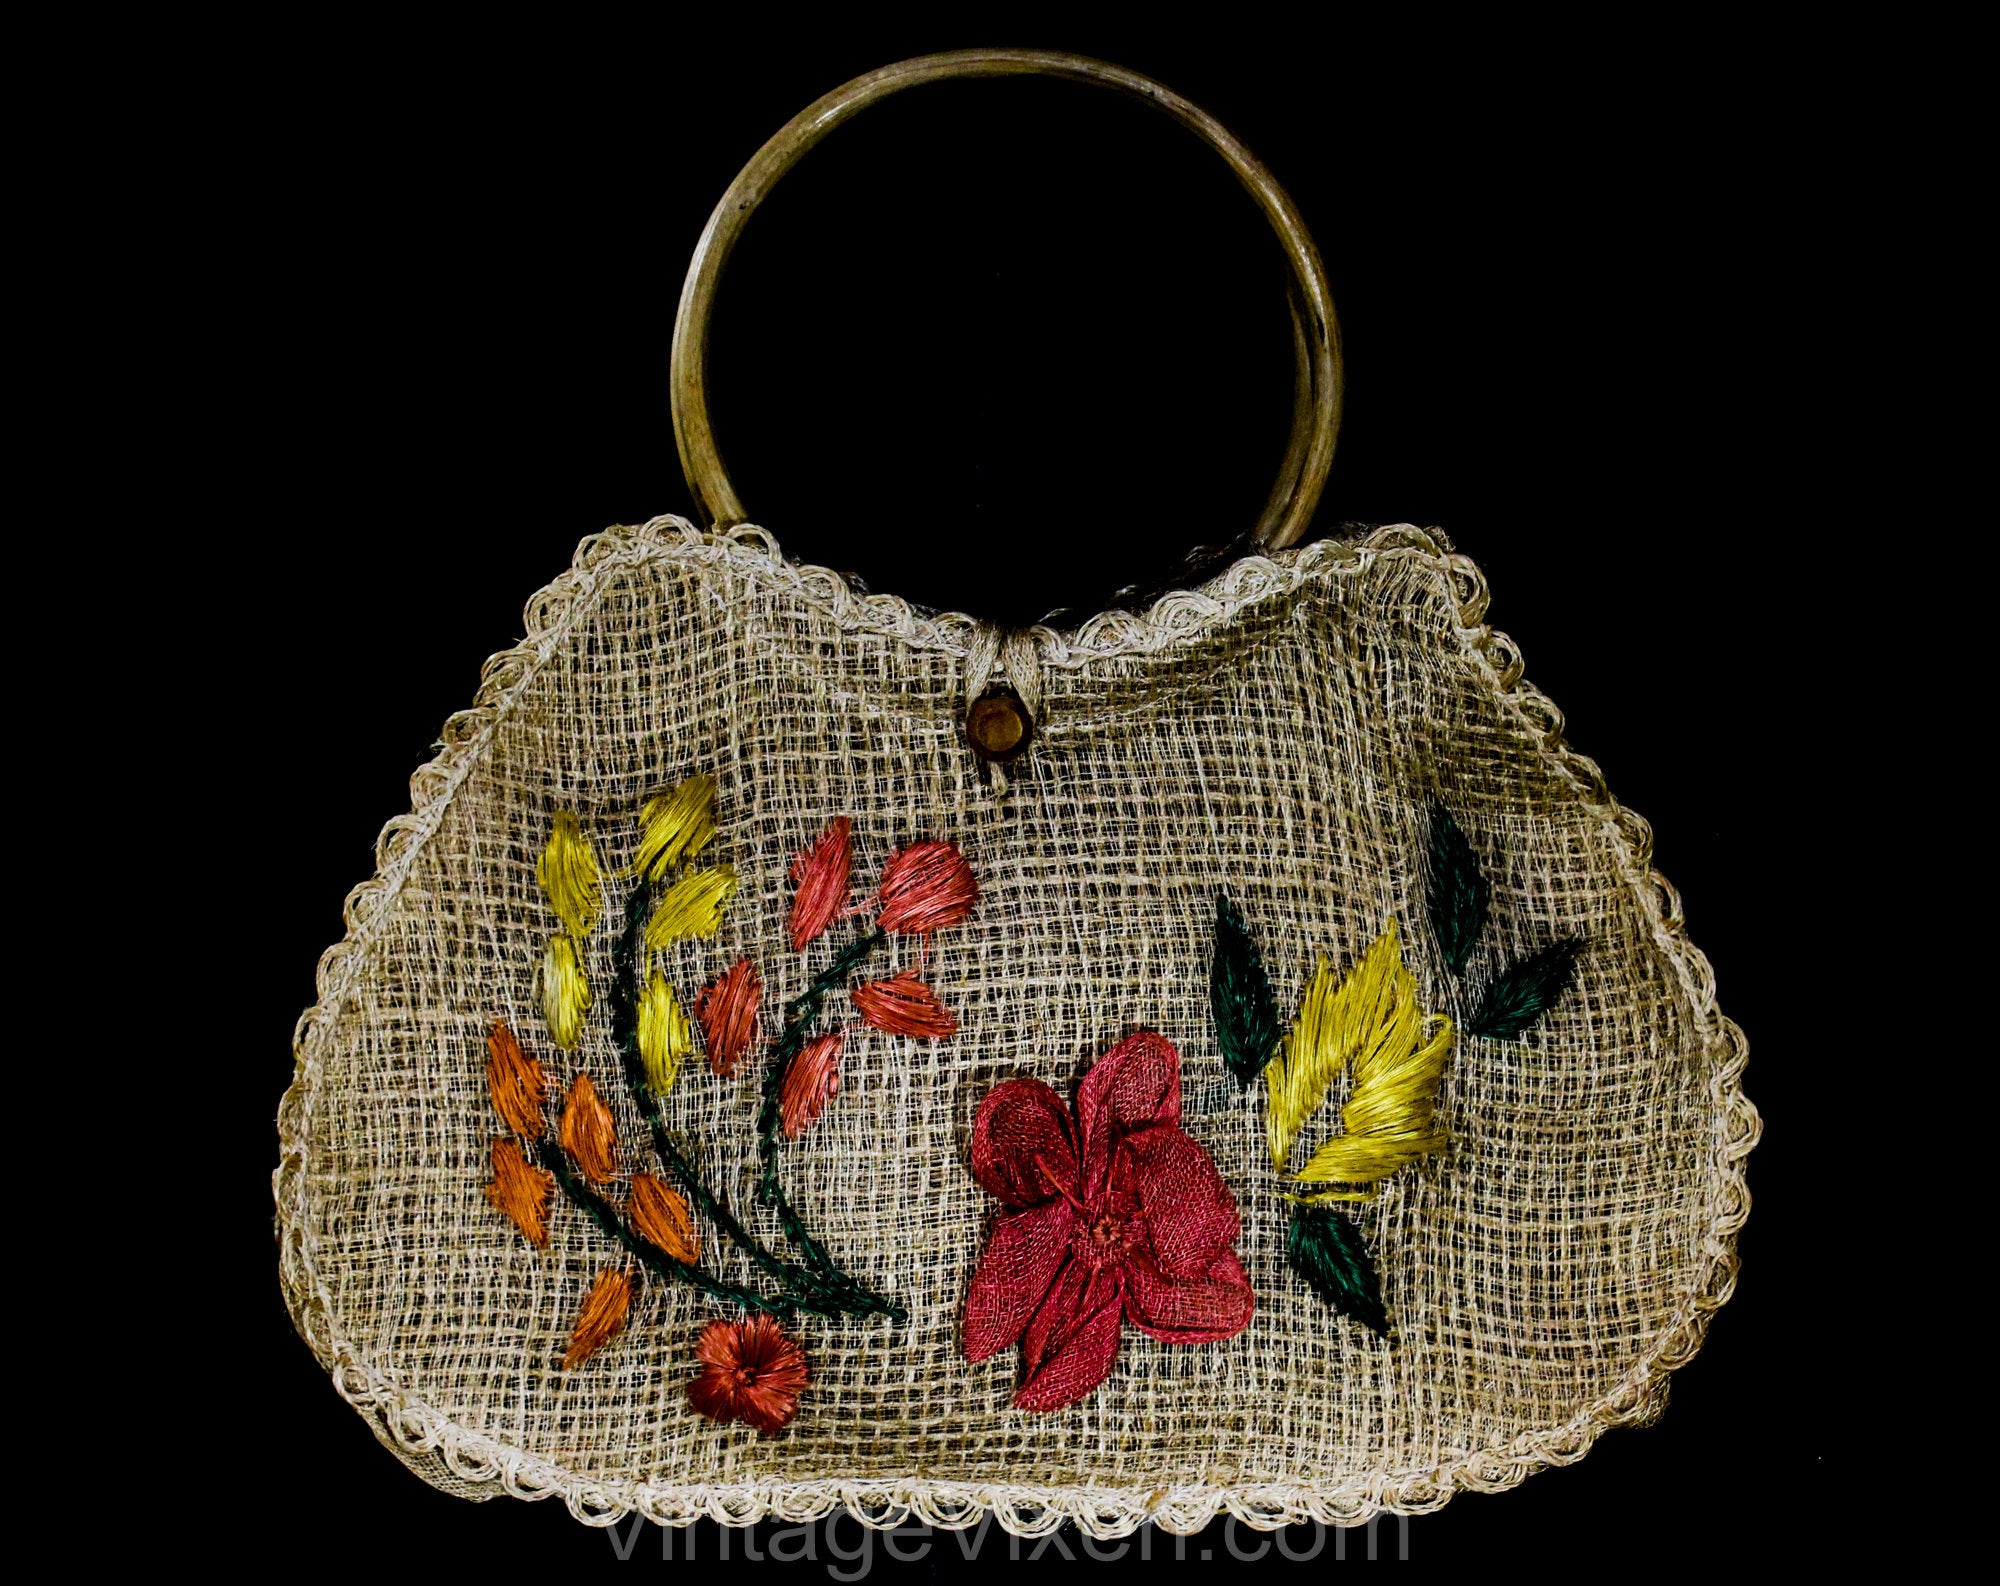 floral boho hippie satchel bag with embroidery beaded handmade